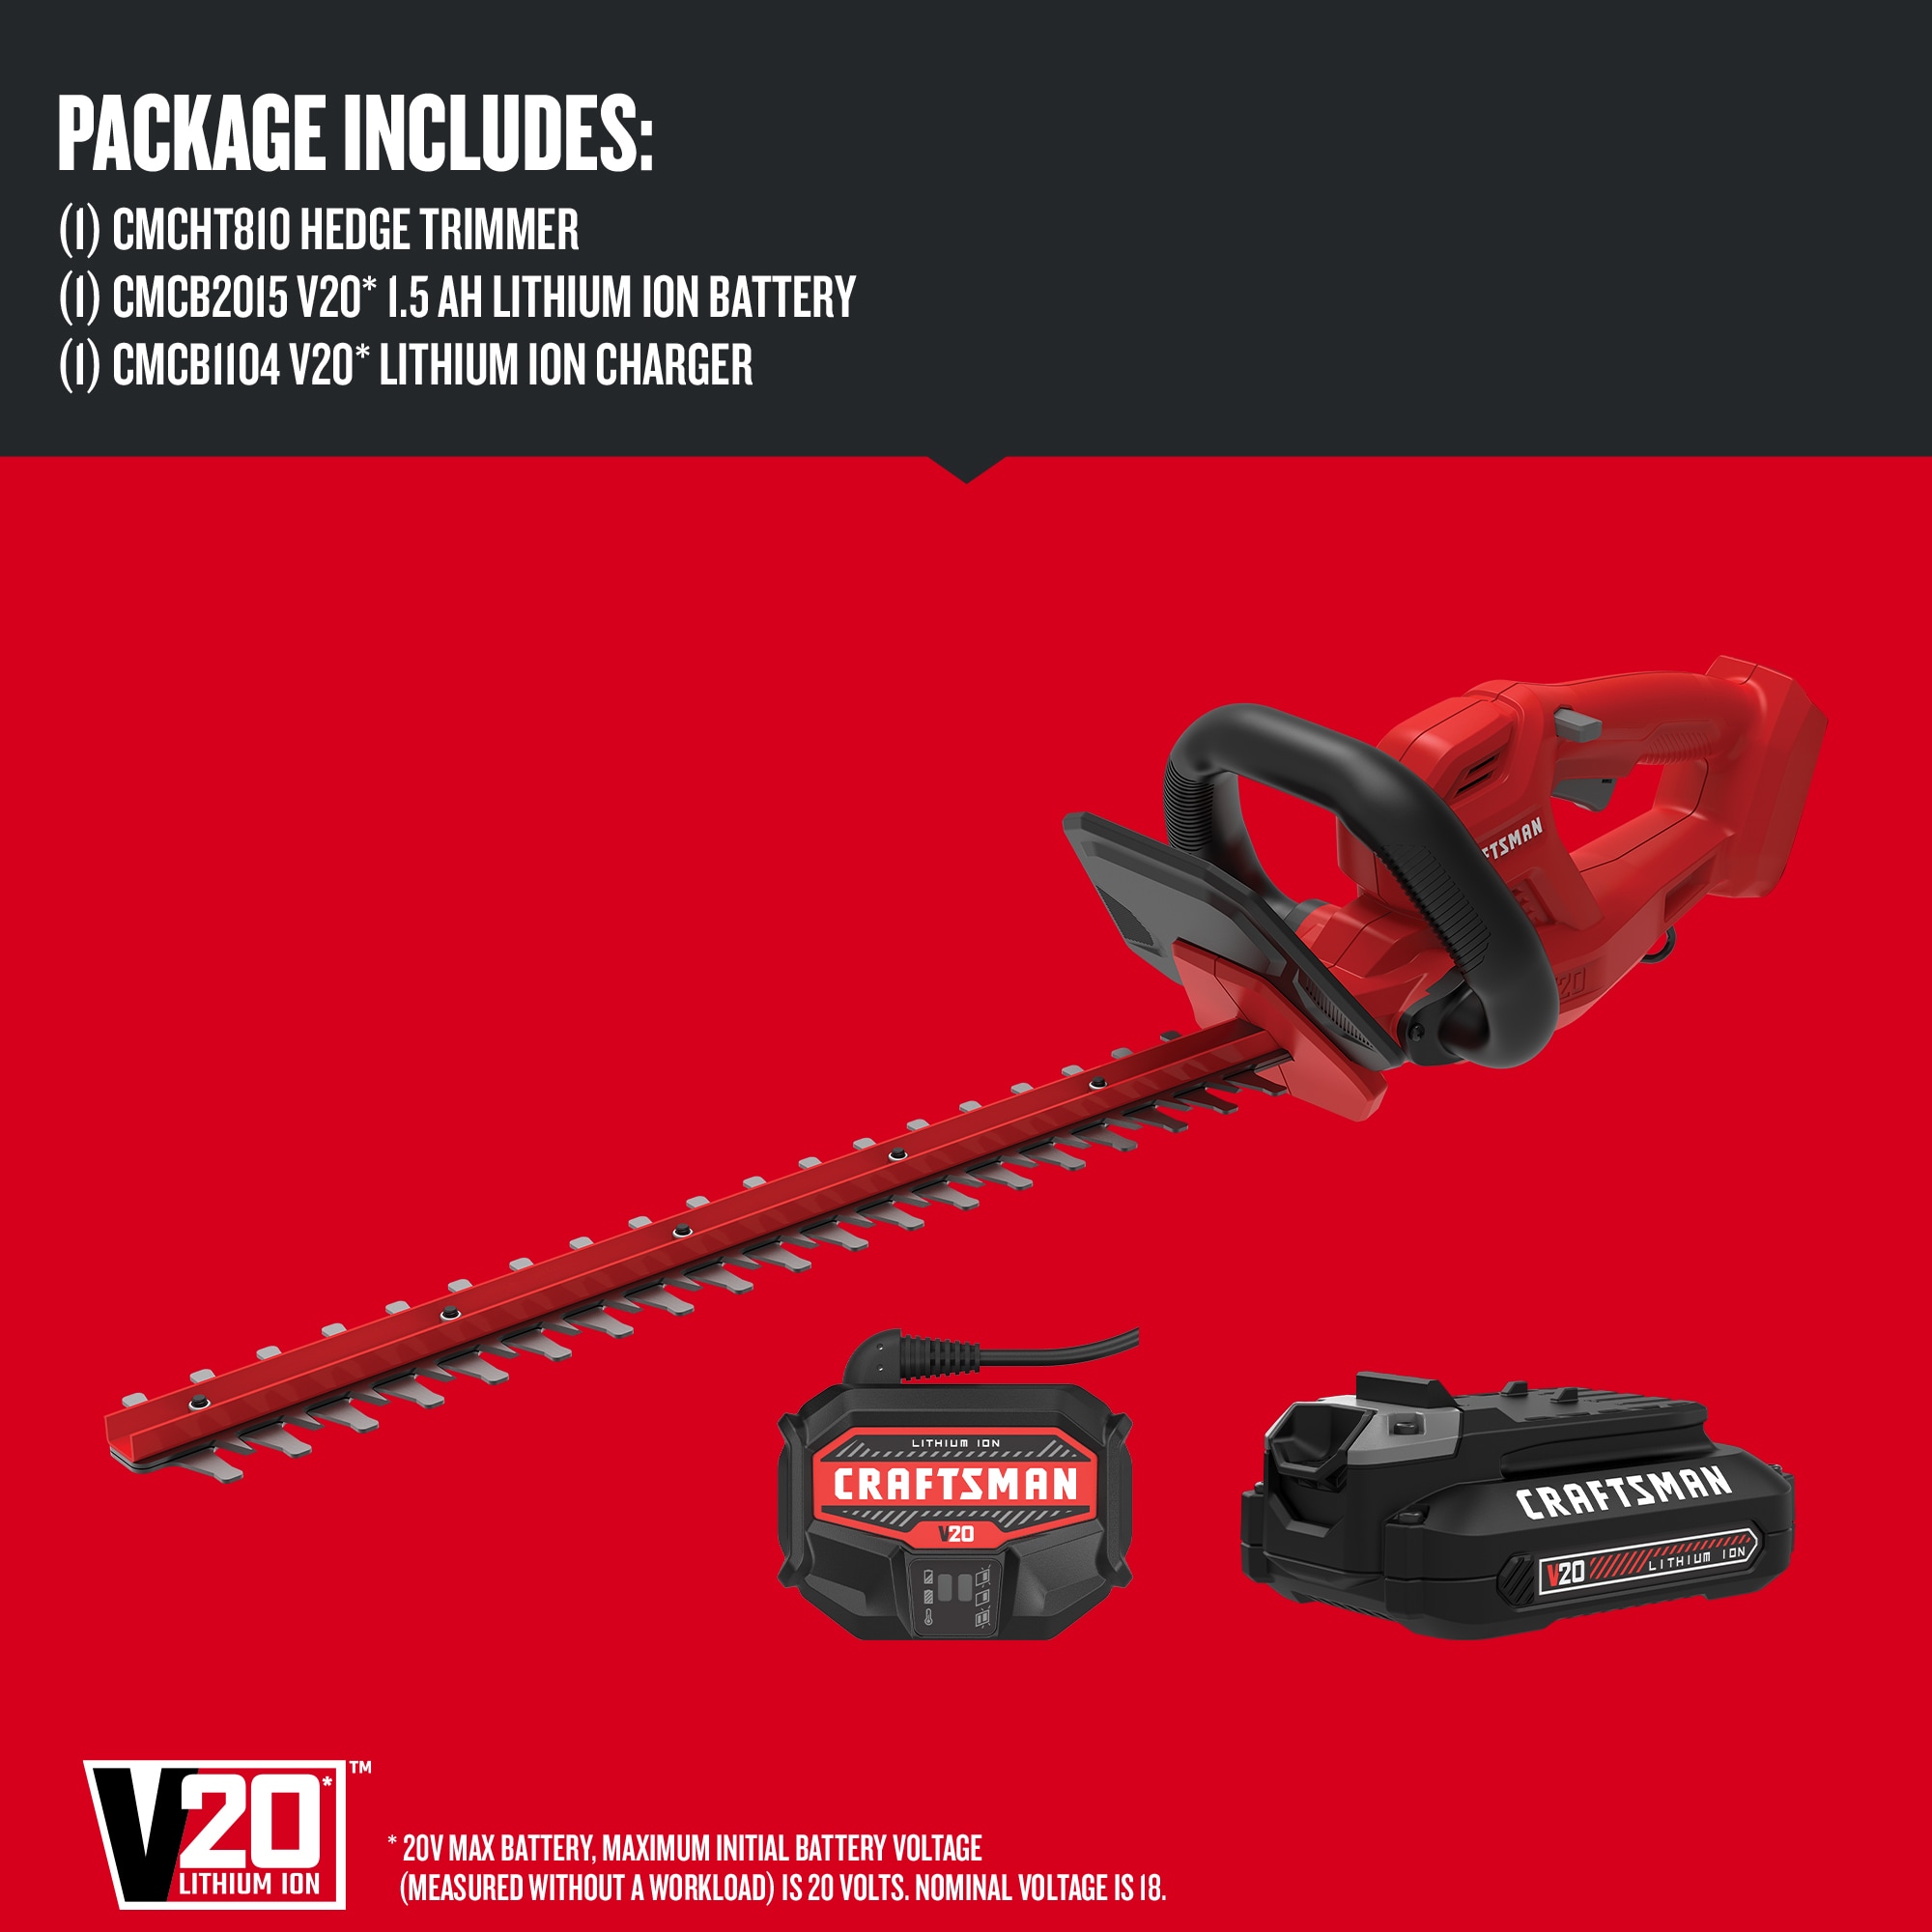 BLACK+DECKER POWERCUT 20-volt Max 22-in Battery Hedge Trimmer 1.5 Ah  (Battery and Charger Included) in the Hedge Trimmers department at